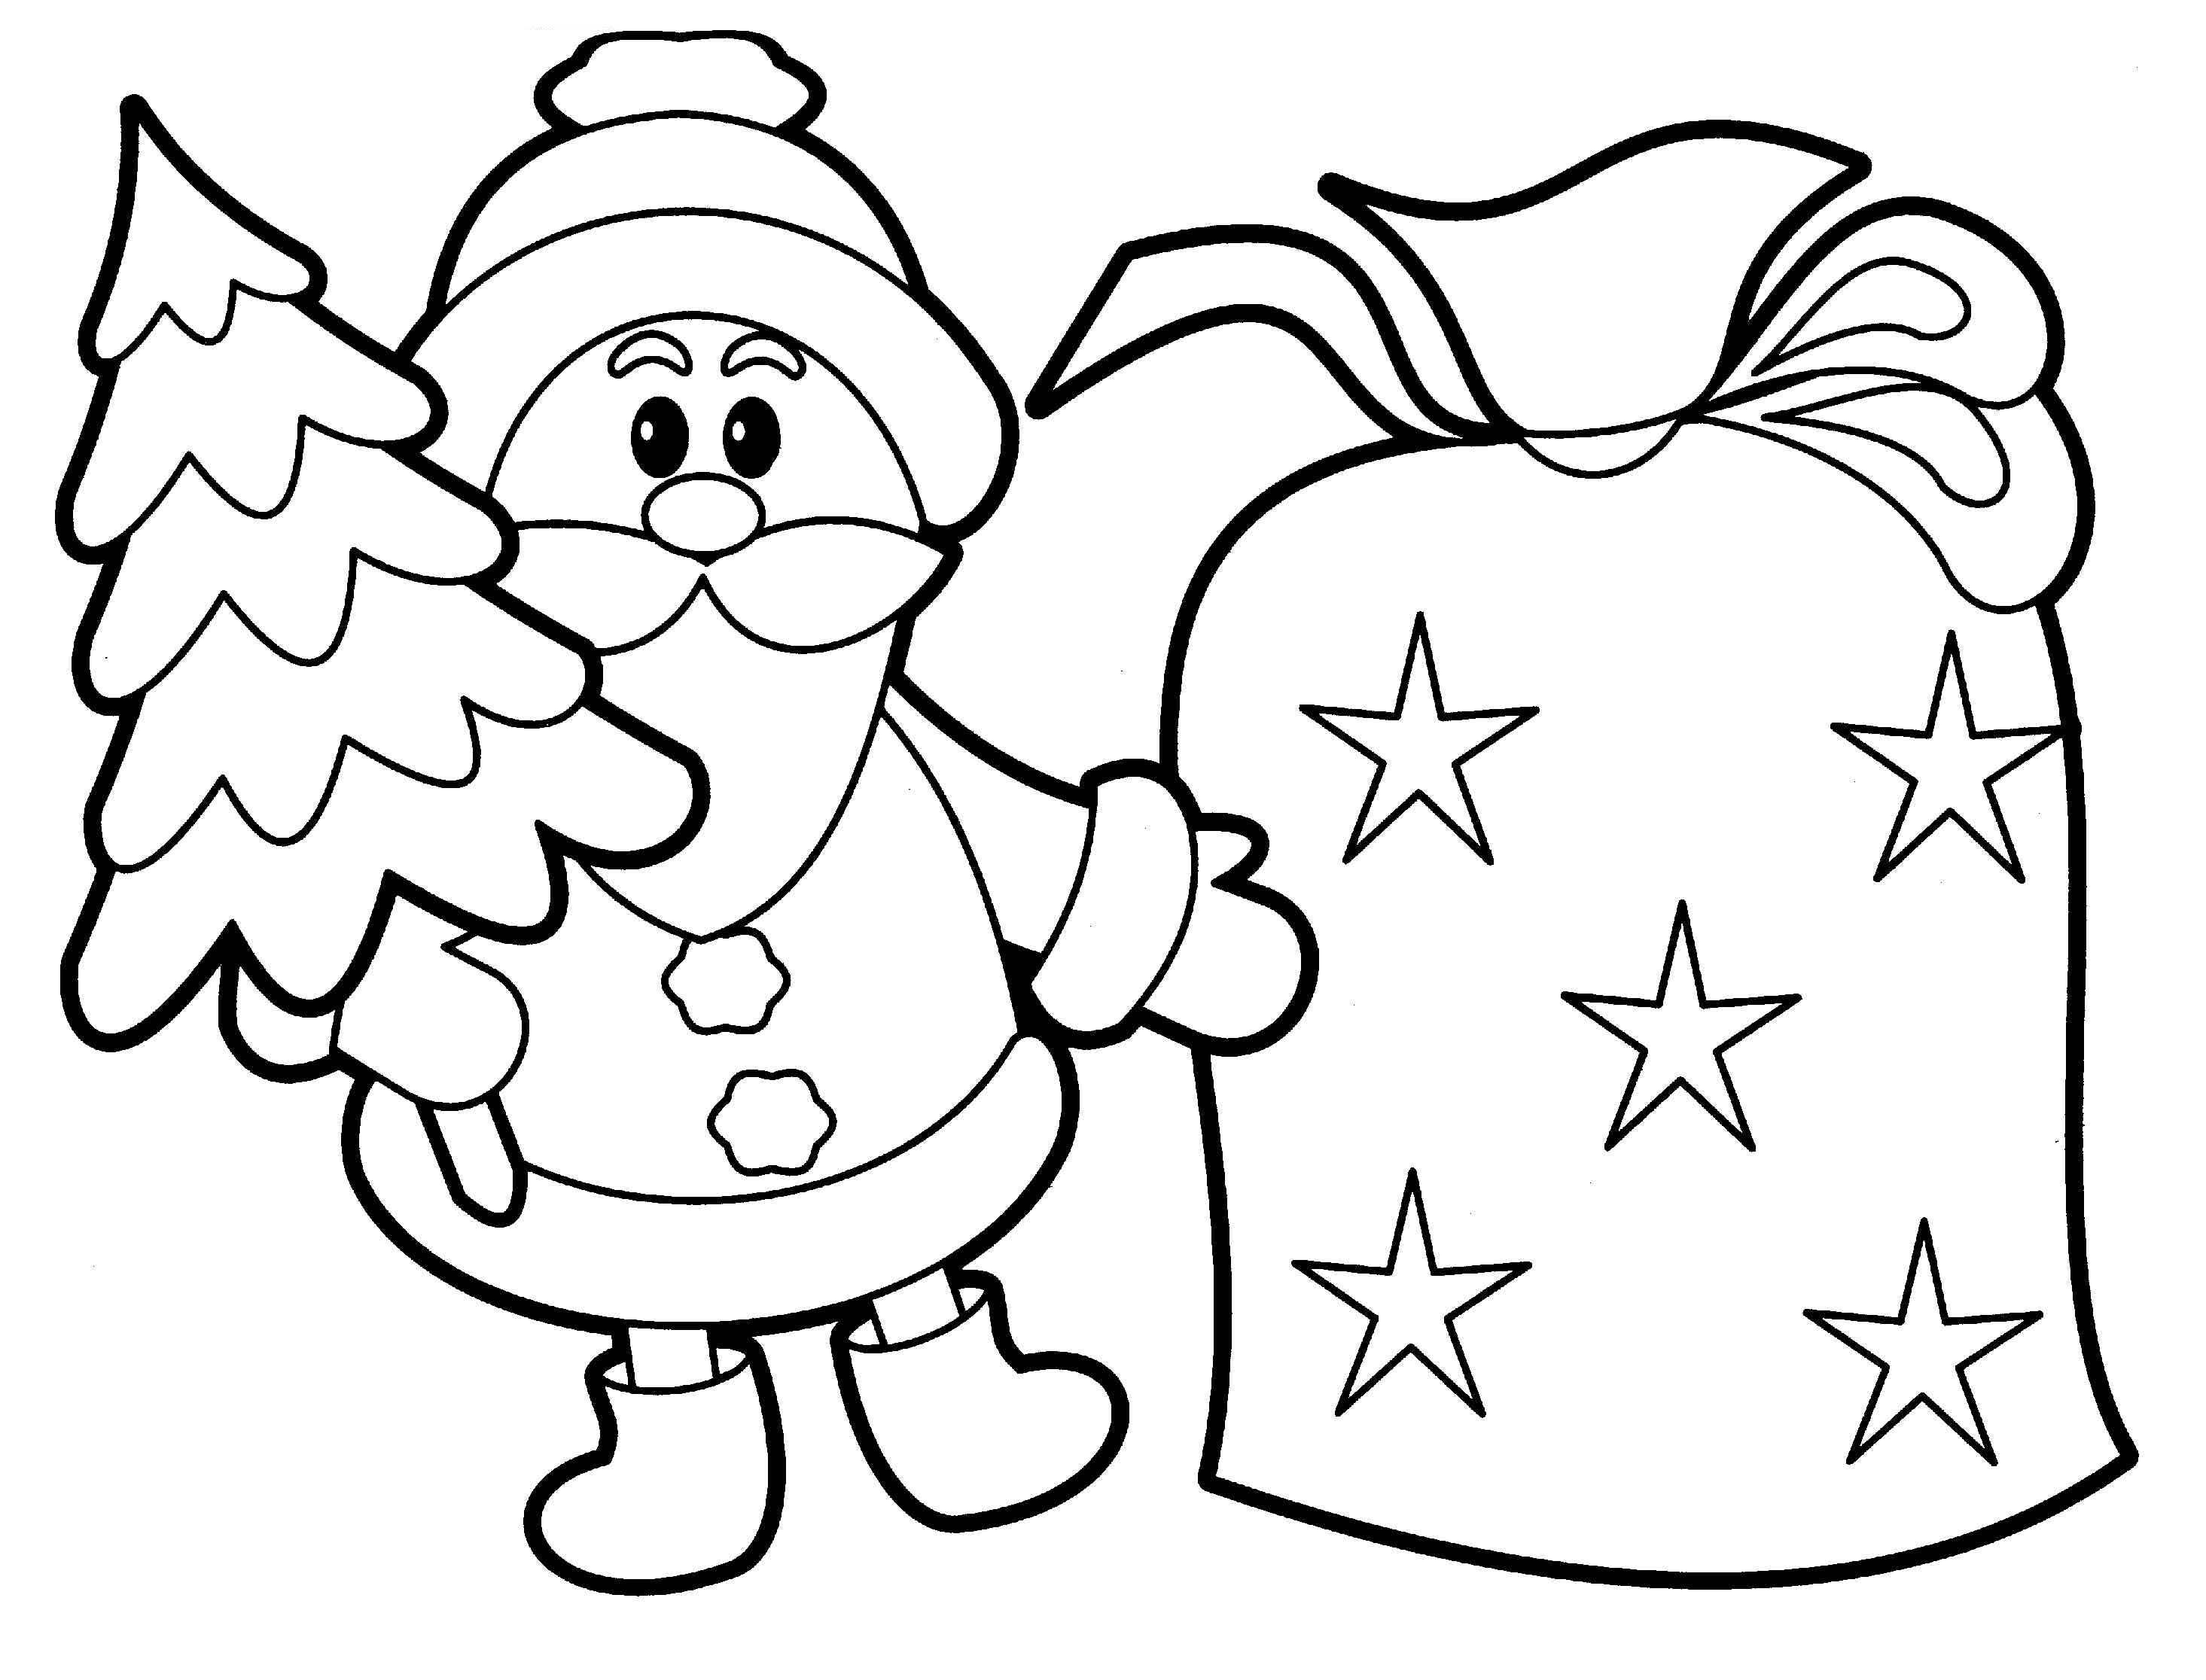 Christmas Coloring Sheets For Kids Free
 Christmas Coloring Pages For Kids